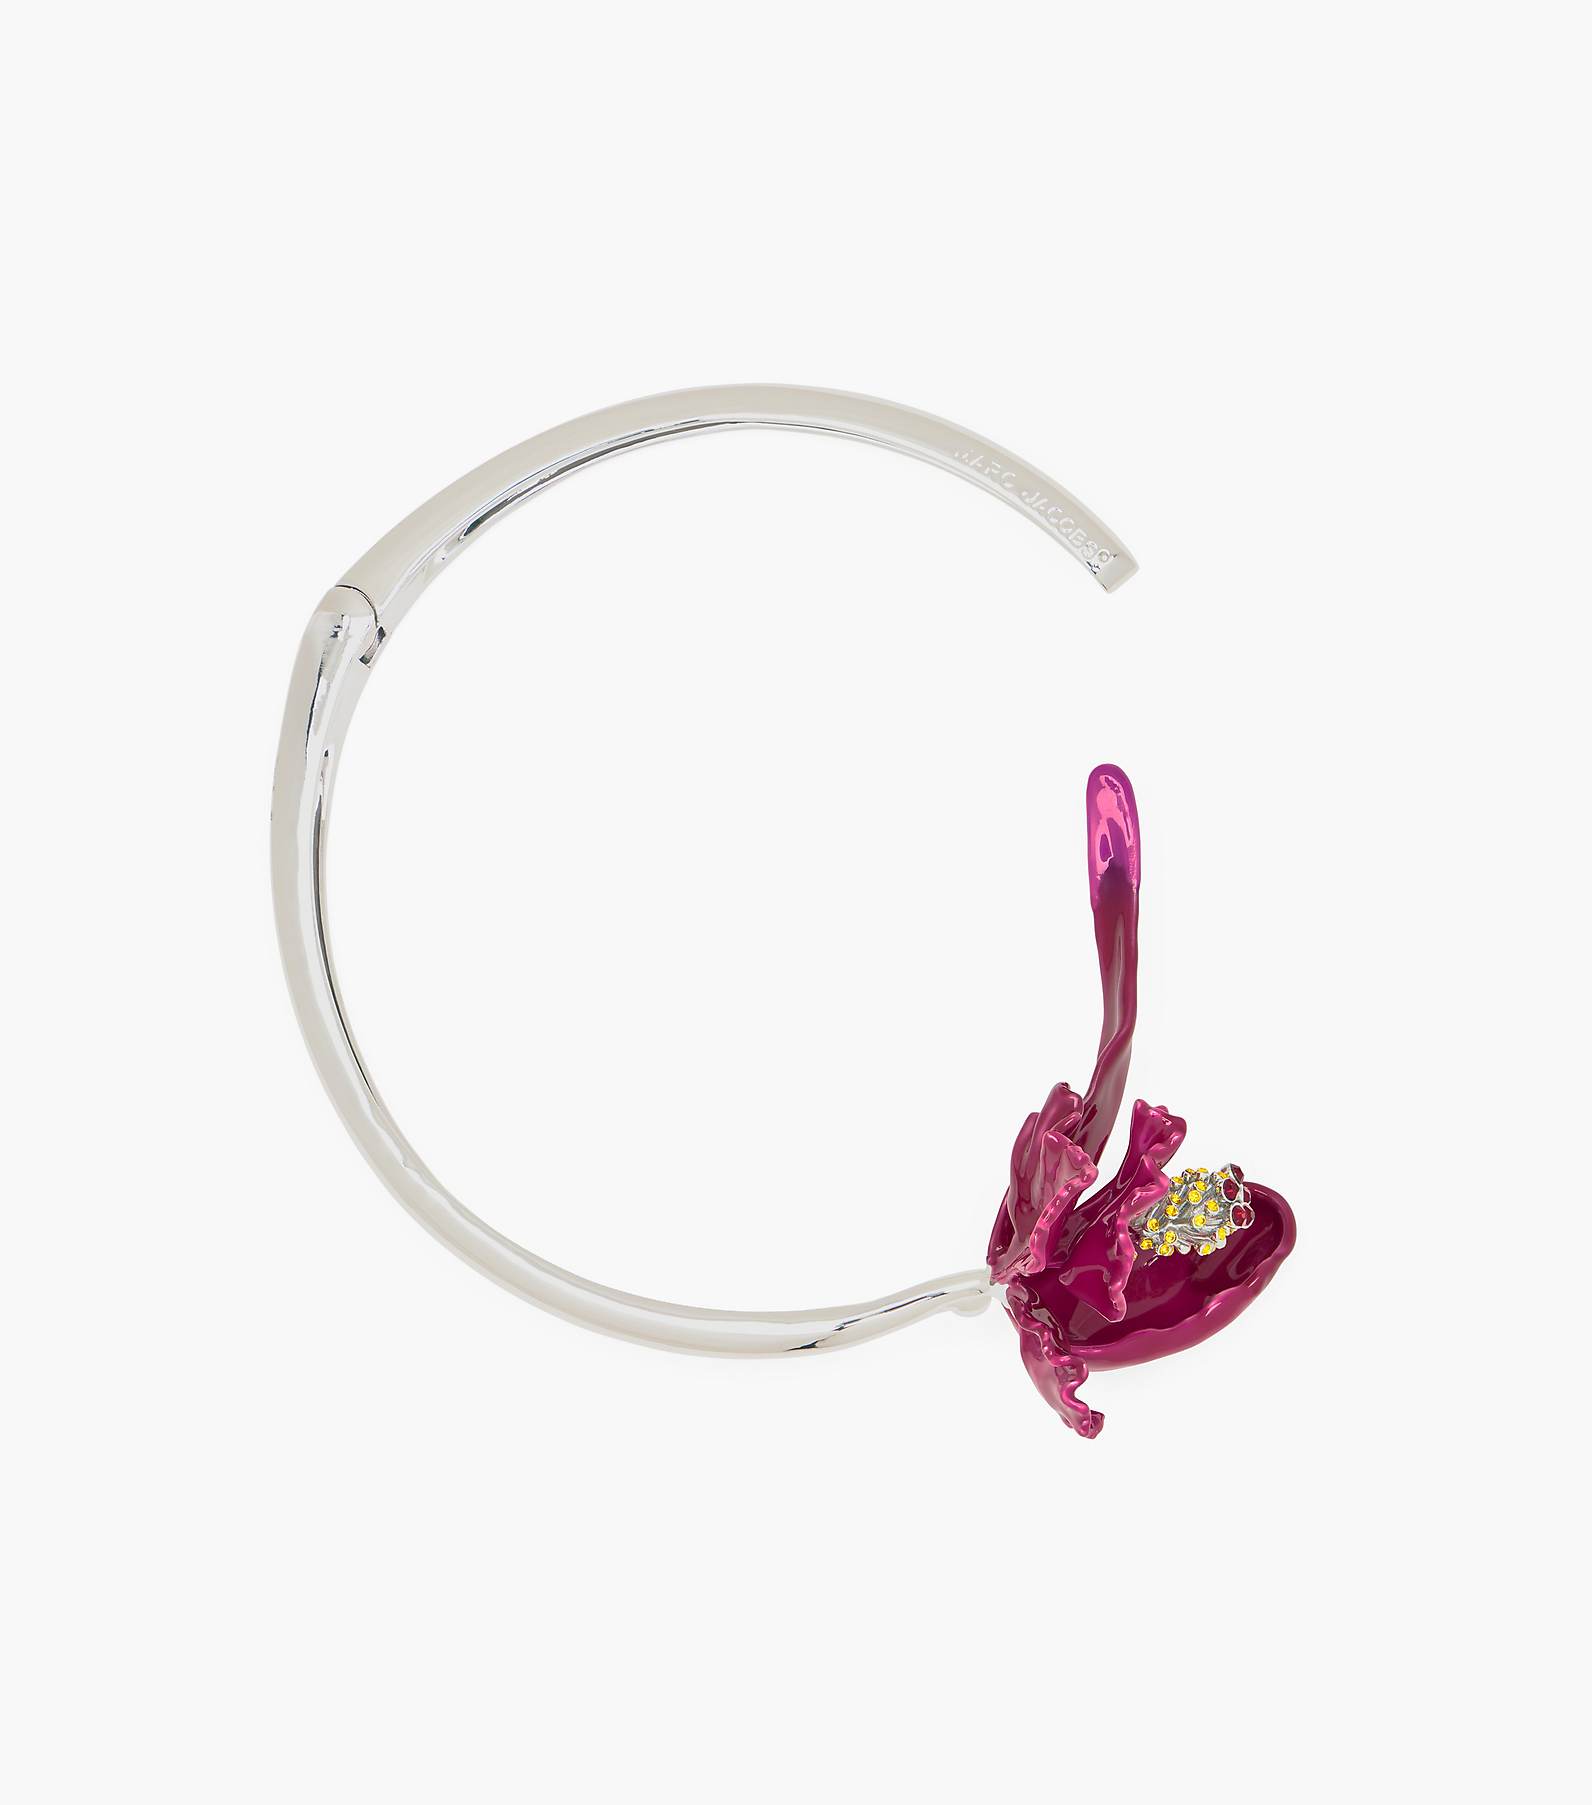 The Future Floral Choker